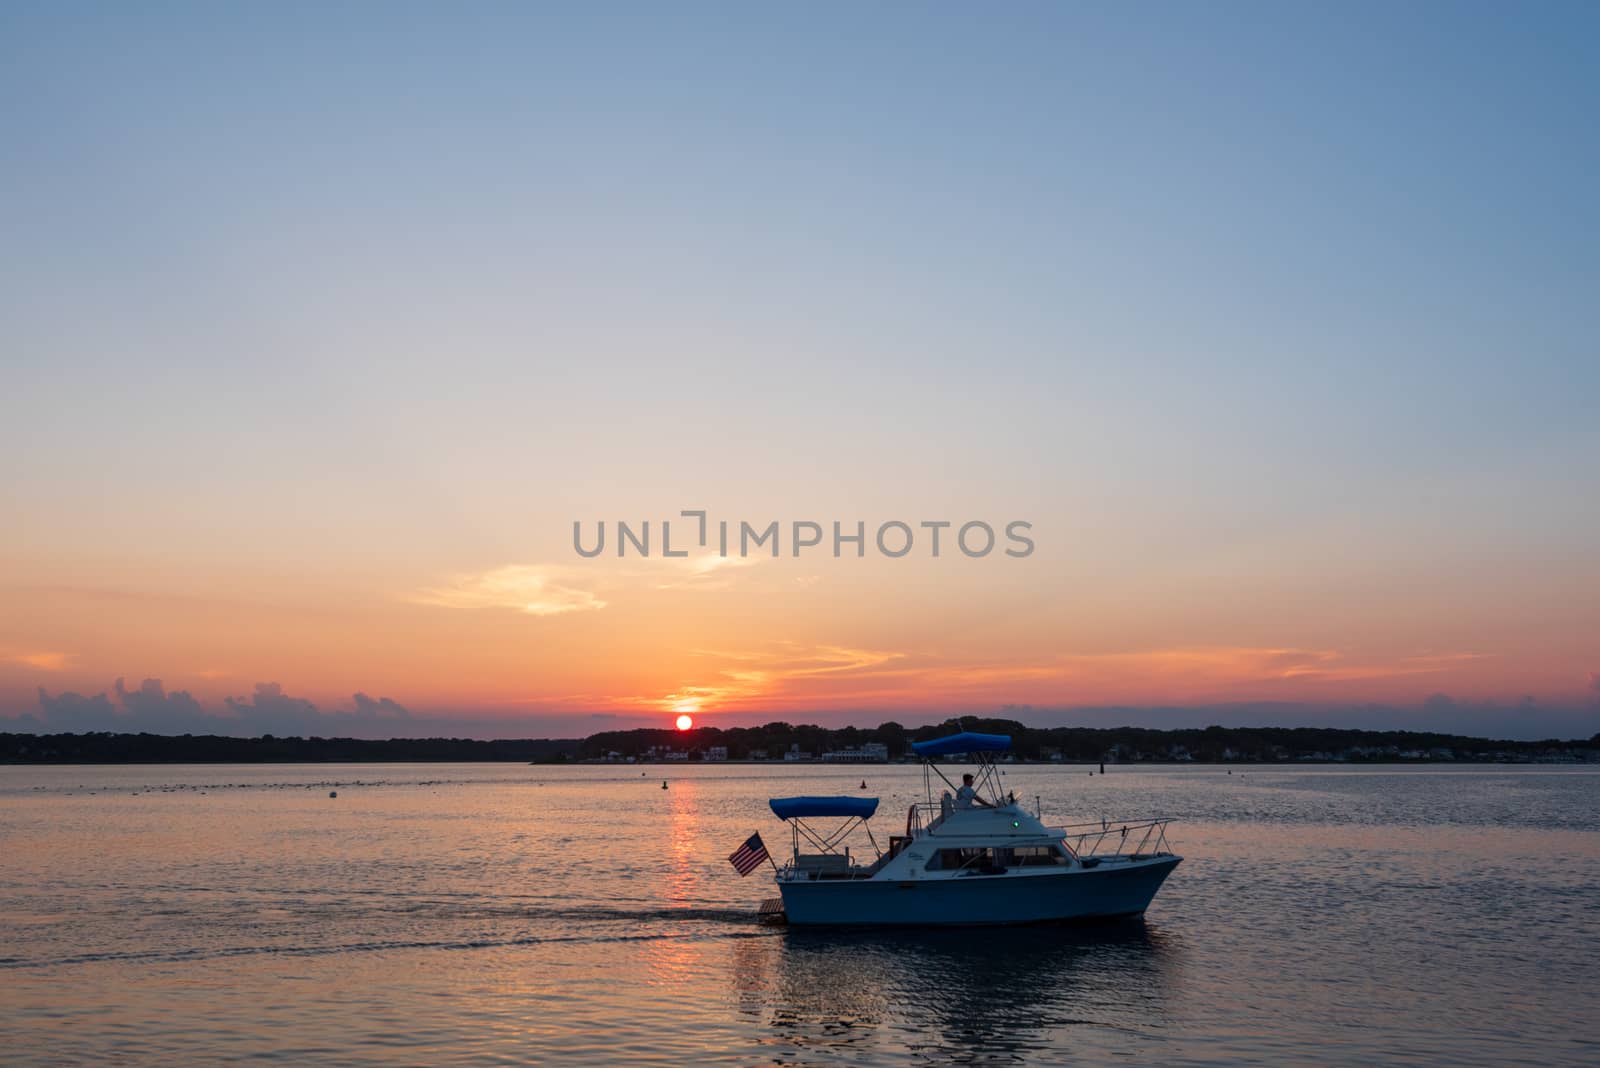 Belmar, NJ, USA -- July 19, 2017. A small boat sails in Shark River at sunset on a summer day in Belmar, NJ.